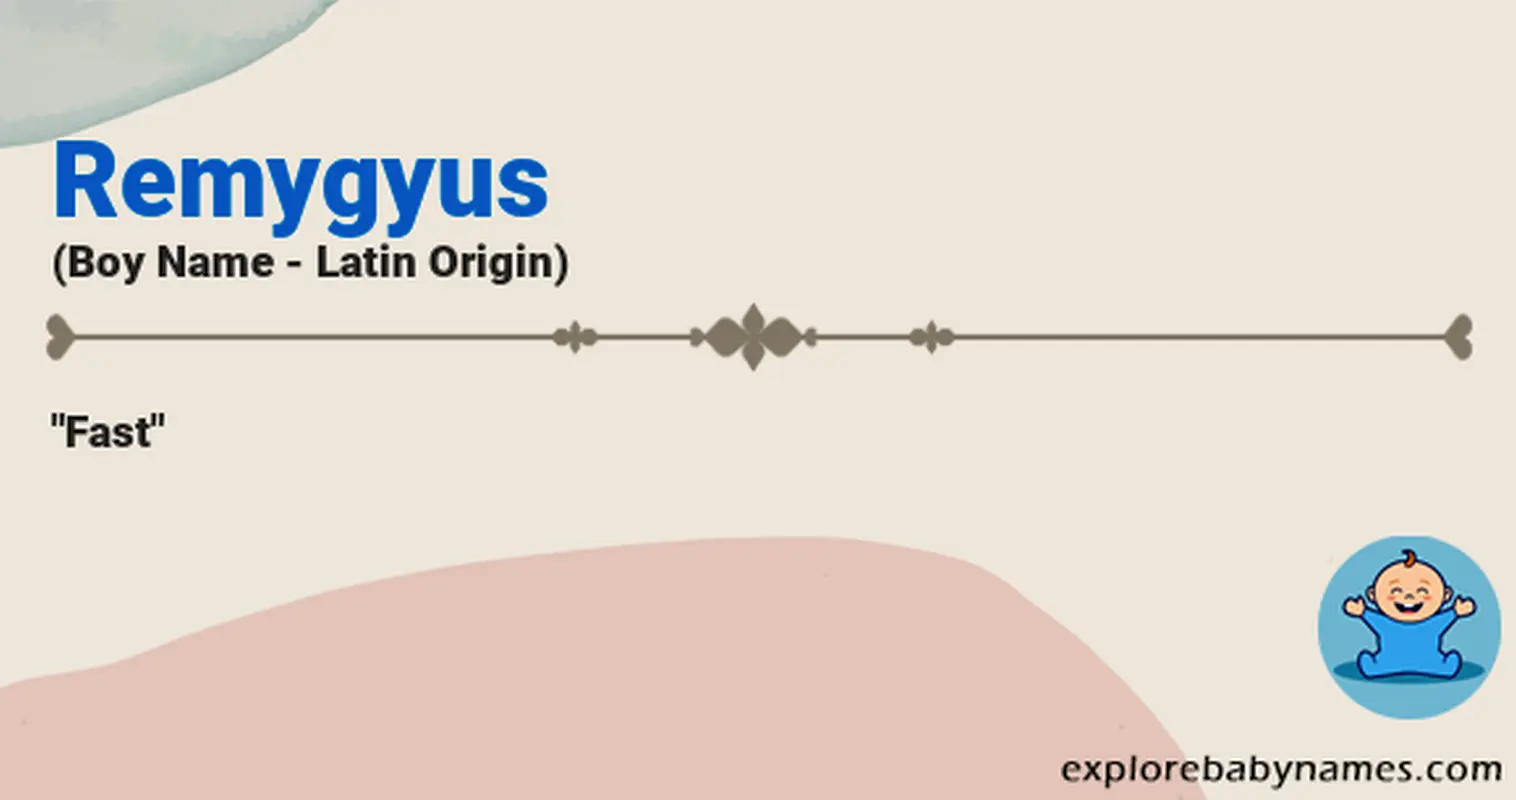 Meaning of Remygyus